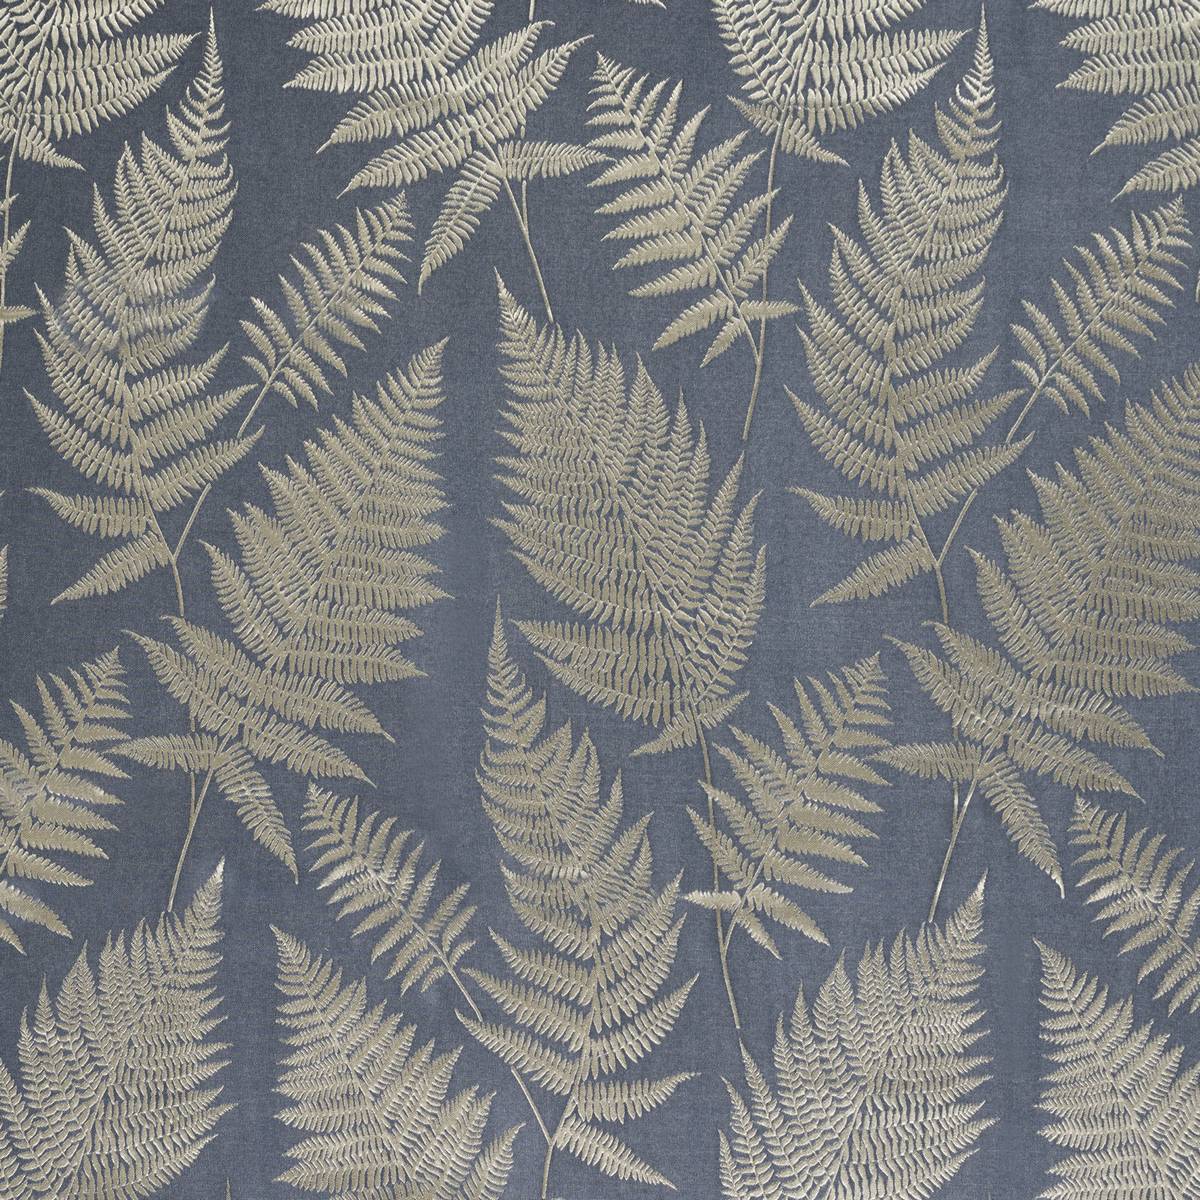 Affinis Danube Fabric by Ashley Wilde